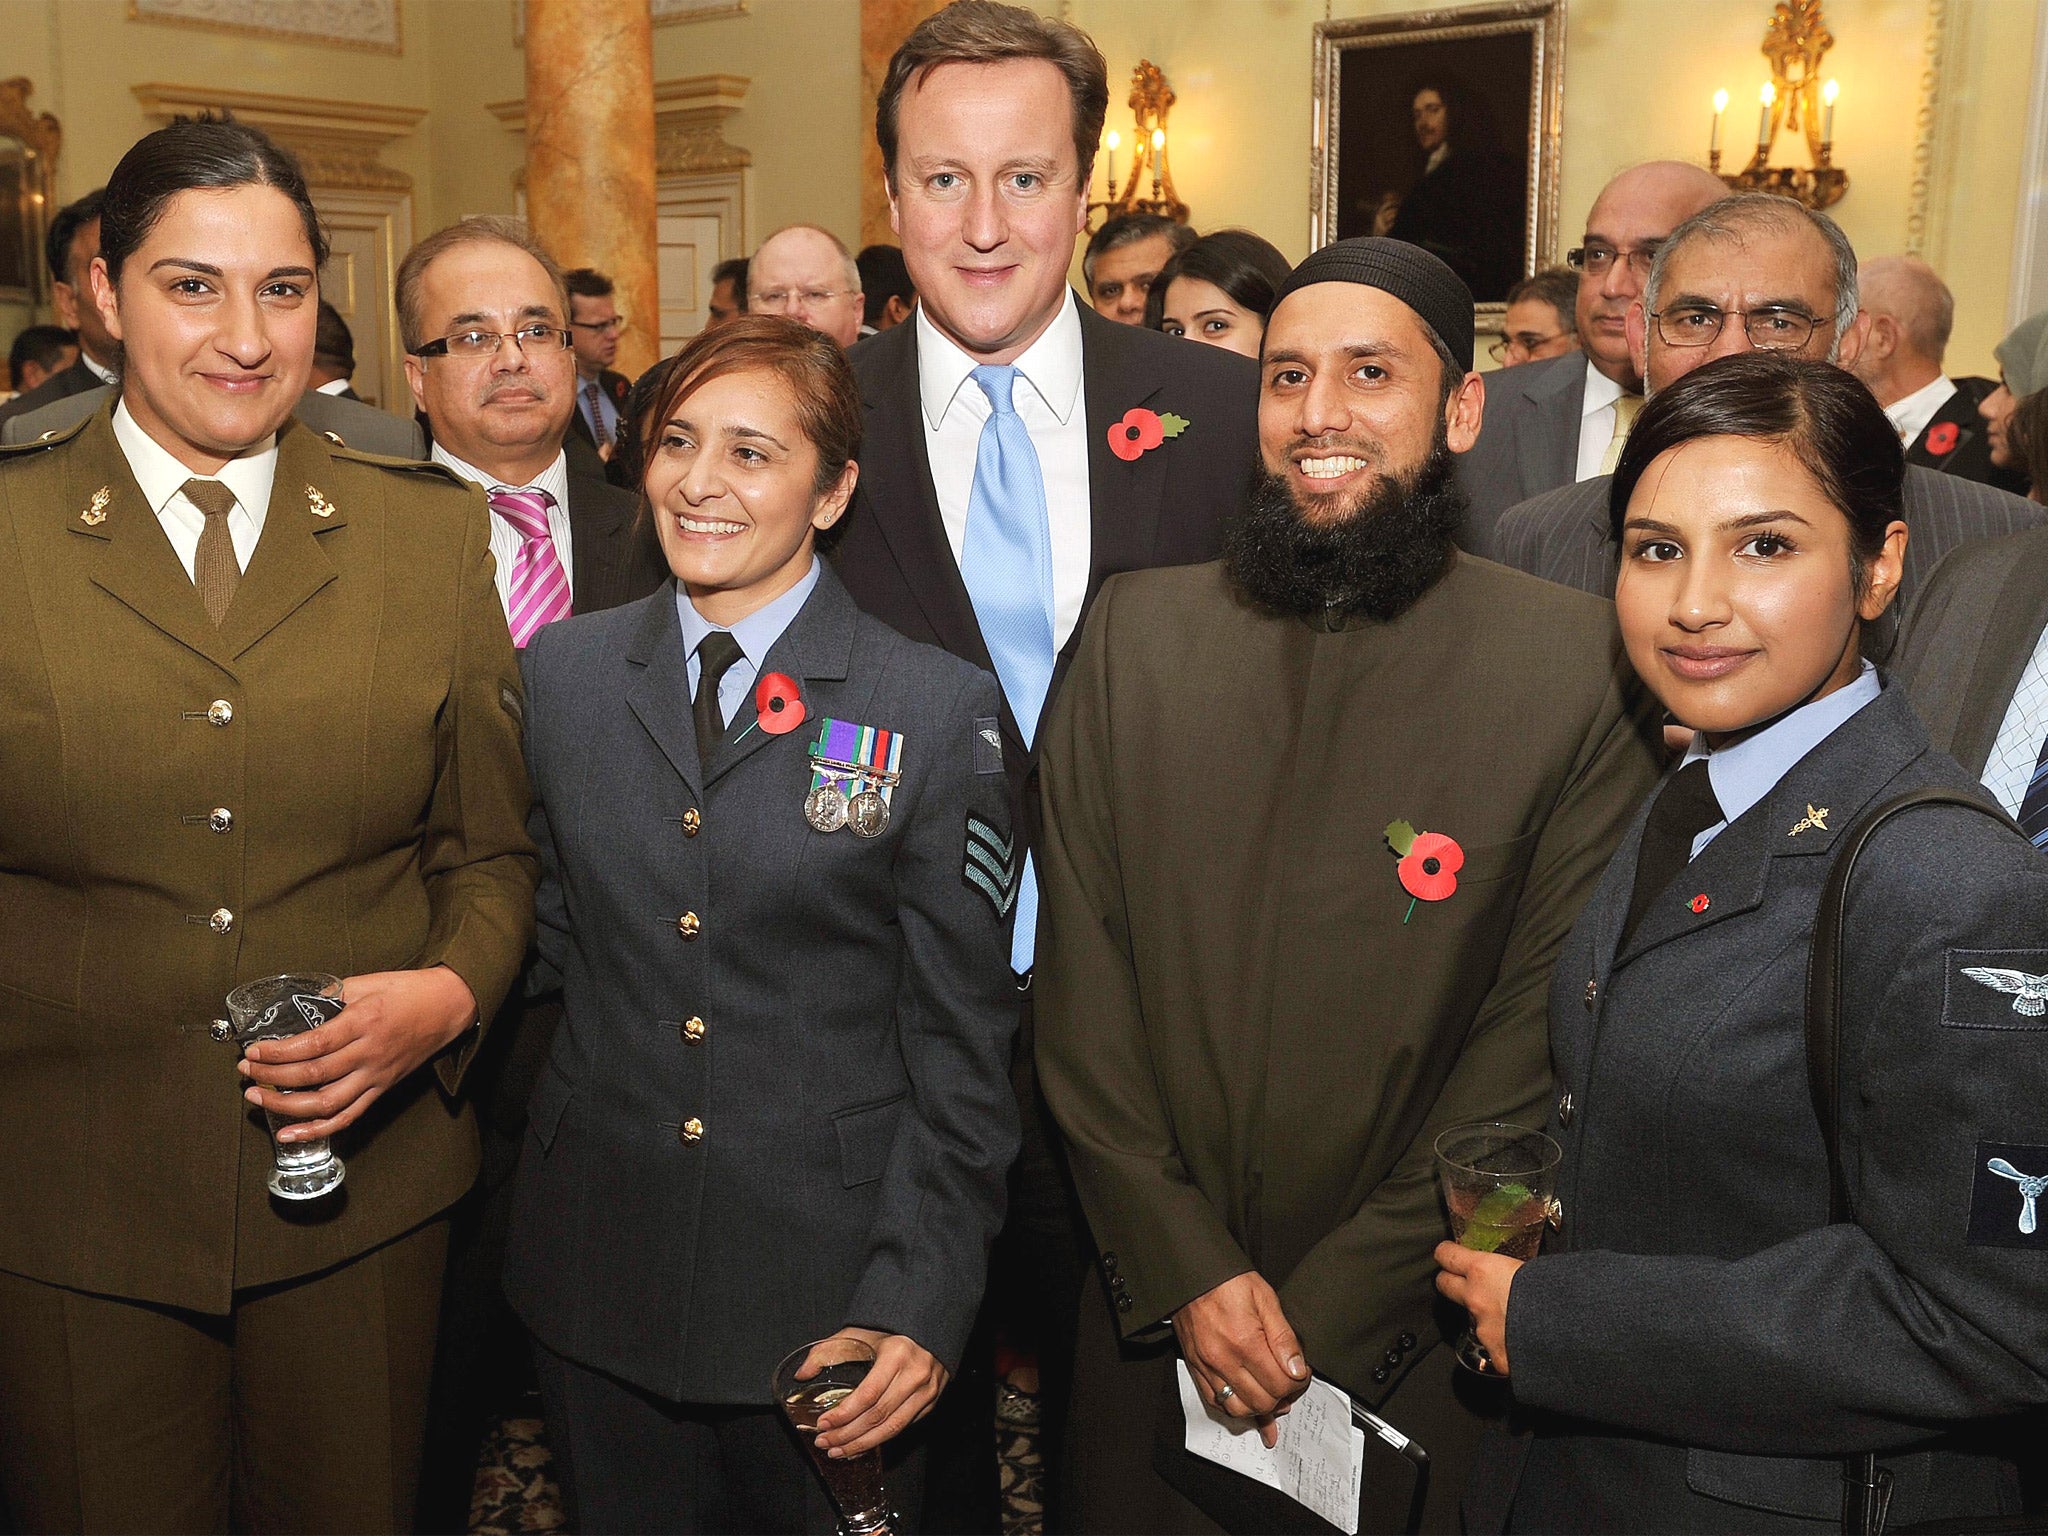 David Cameron joins guests at a reception at No 10 to celebrate Eid in 2011